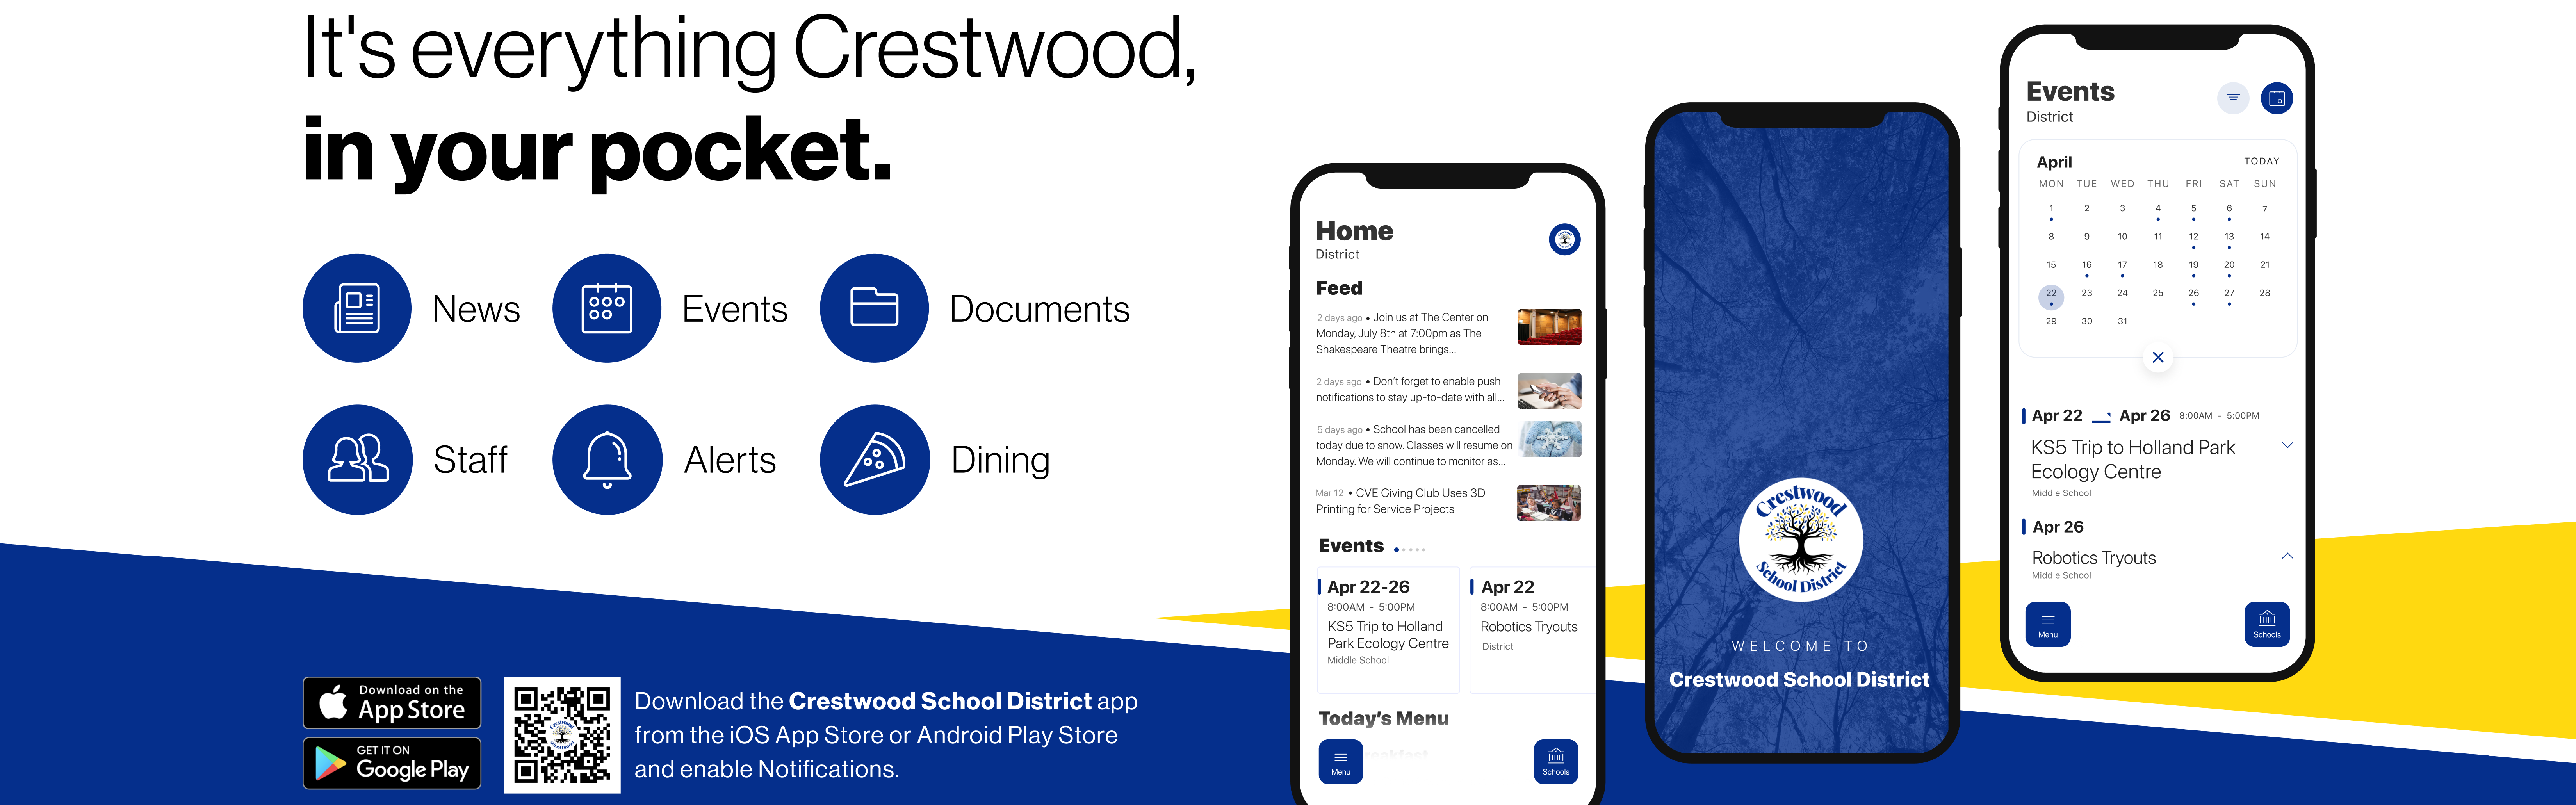 Introducing the Crestwood School District Mobile App! it's everything Crestwood, in your pocket! Download the Crestwood School District App from the I O S App Store, or the Android Play Store, and enable notifications.